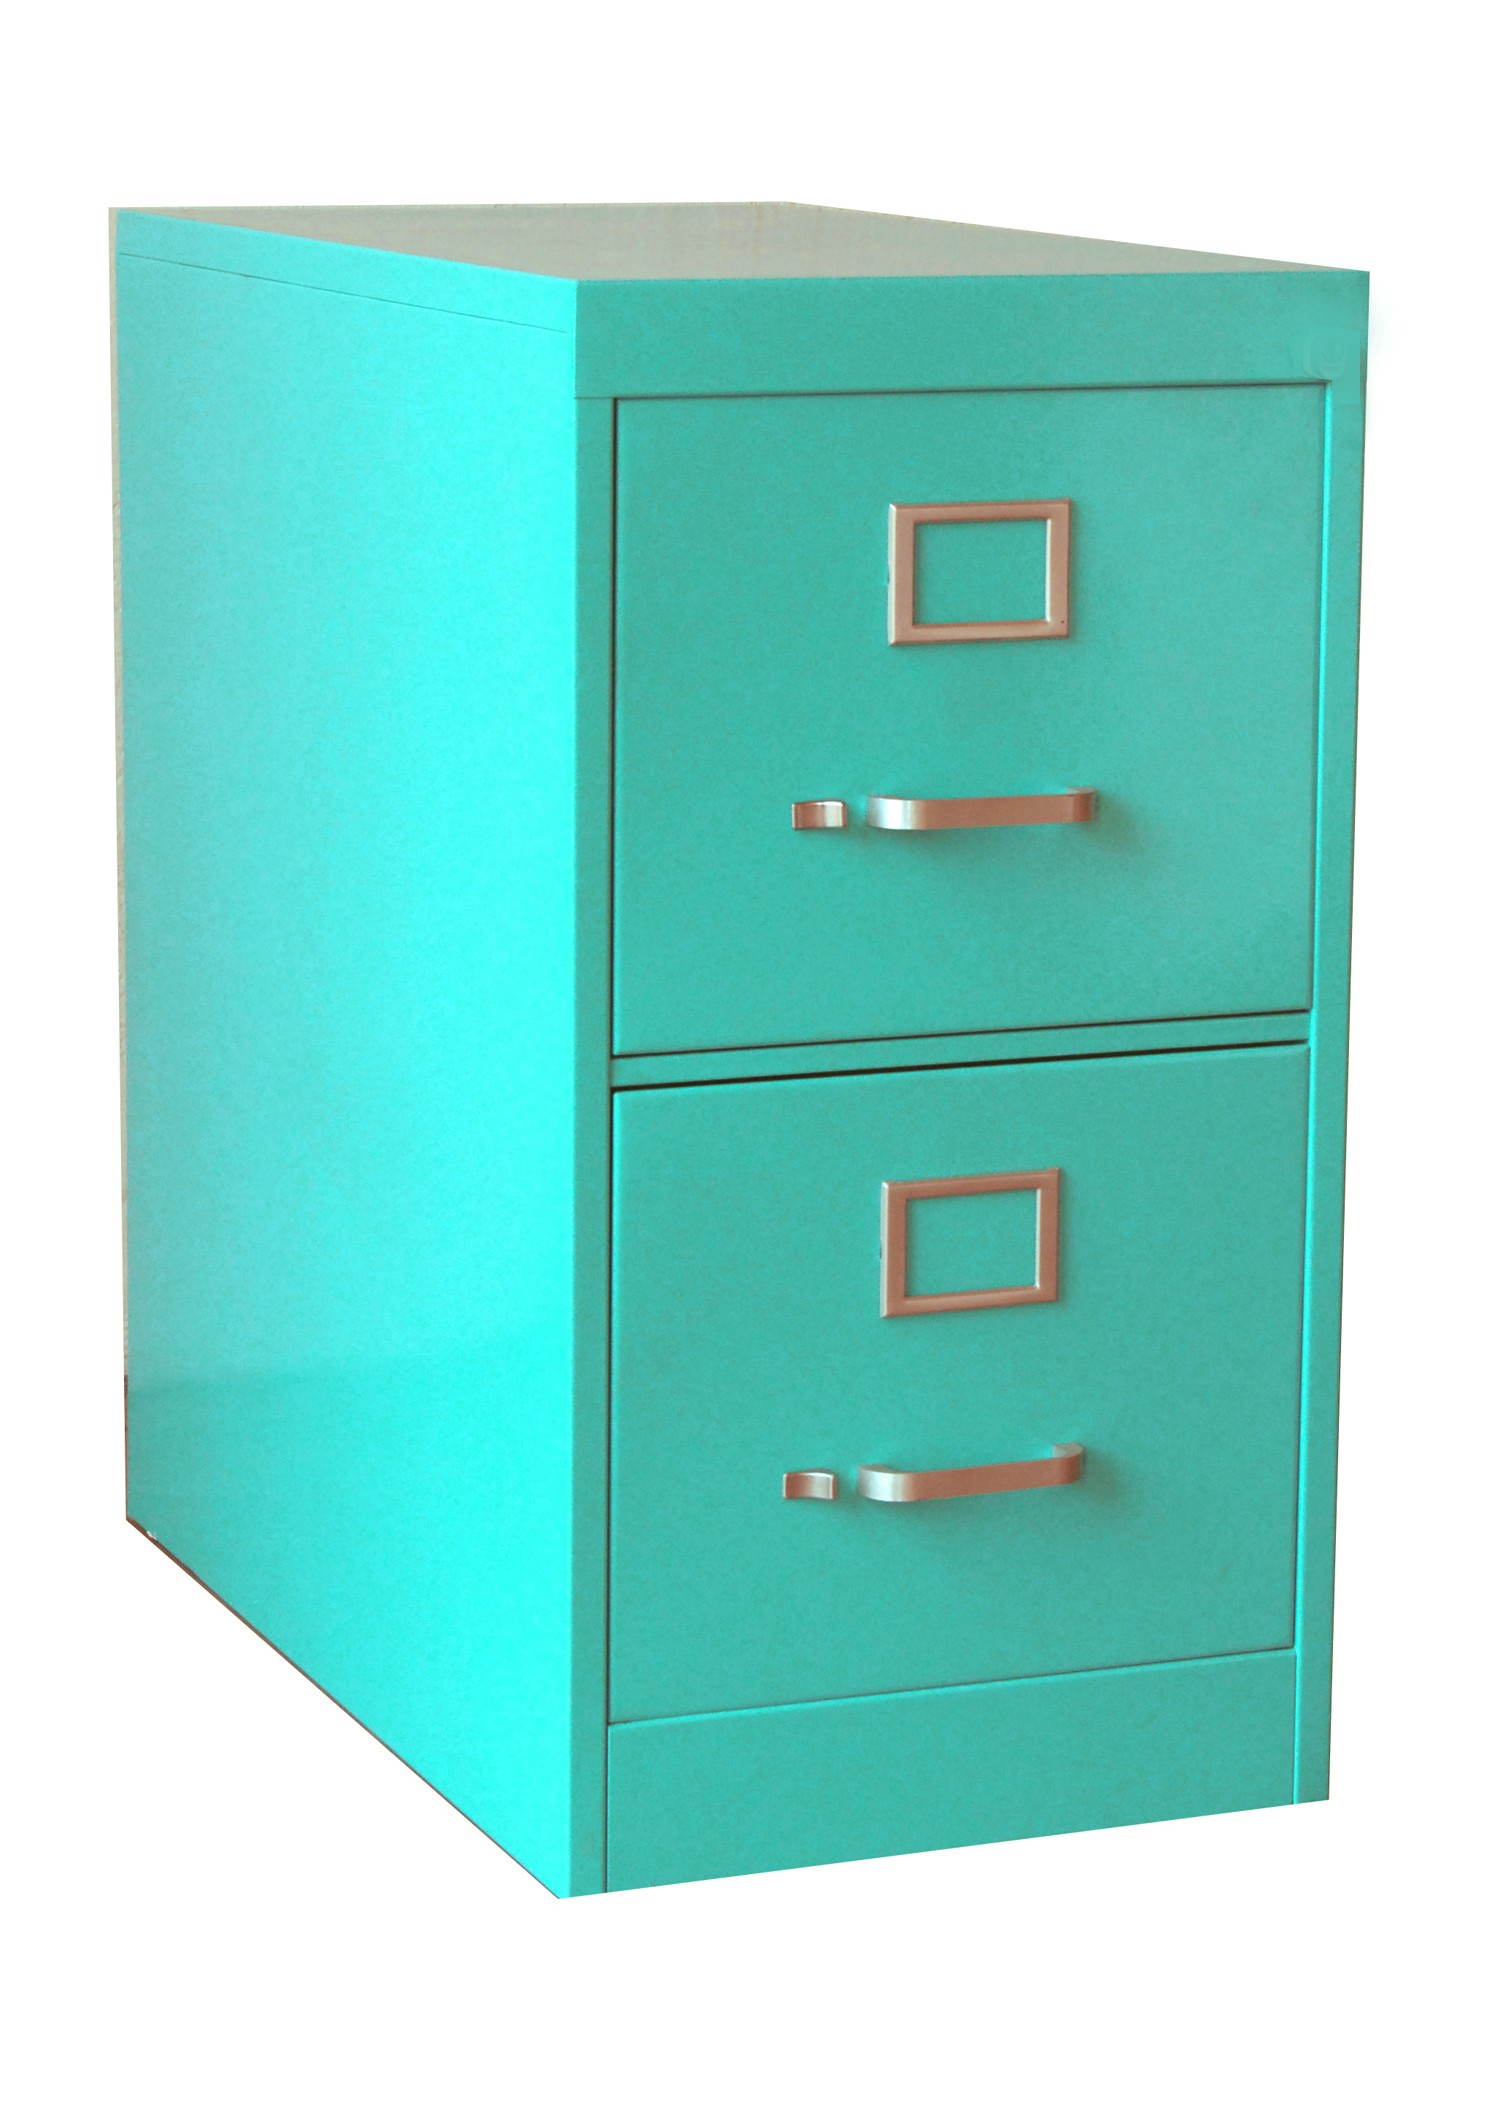 File Cabinets Amusing Wooden File Cabinets File Cabinets Deep File intended for sizing 1512 X 2120